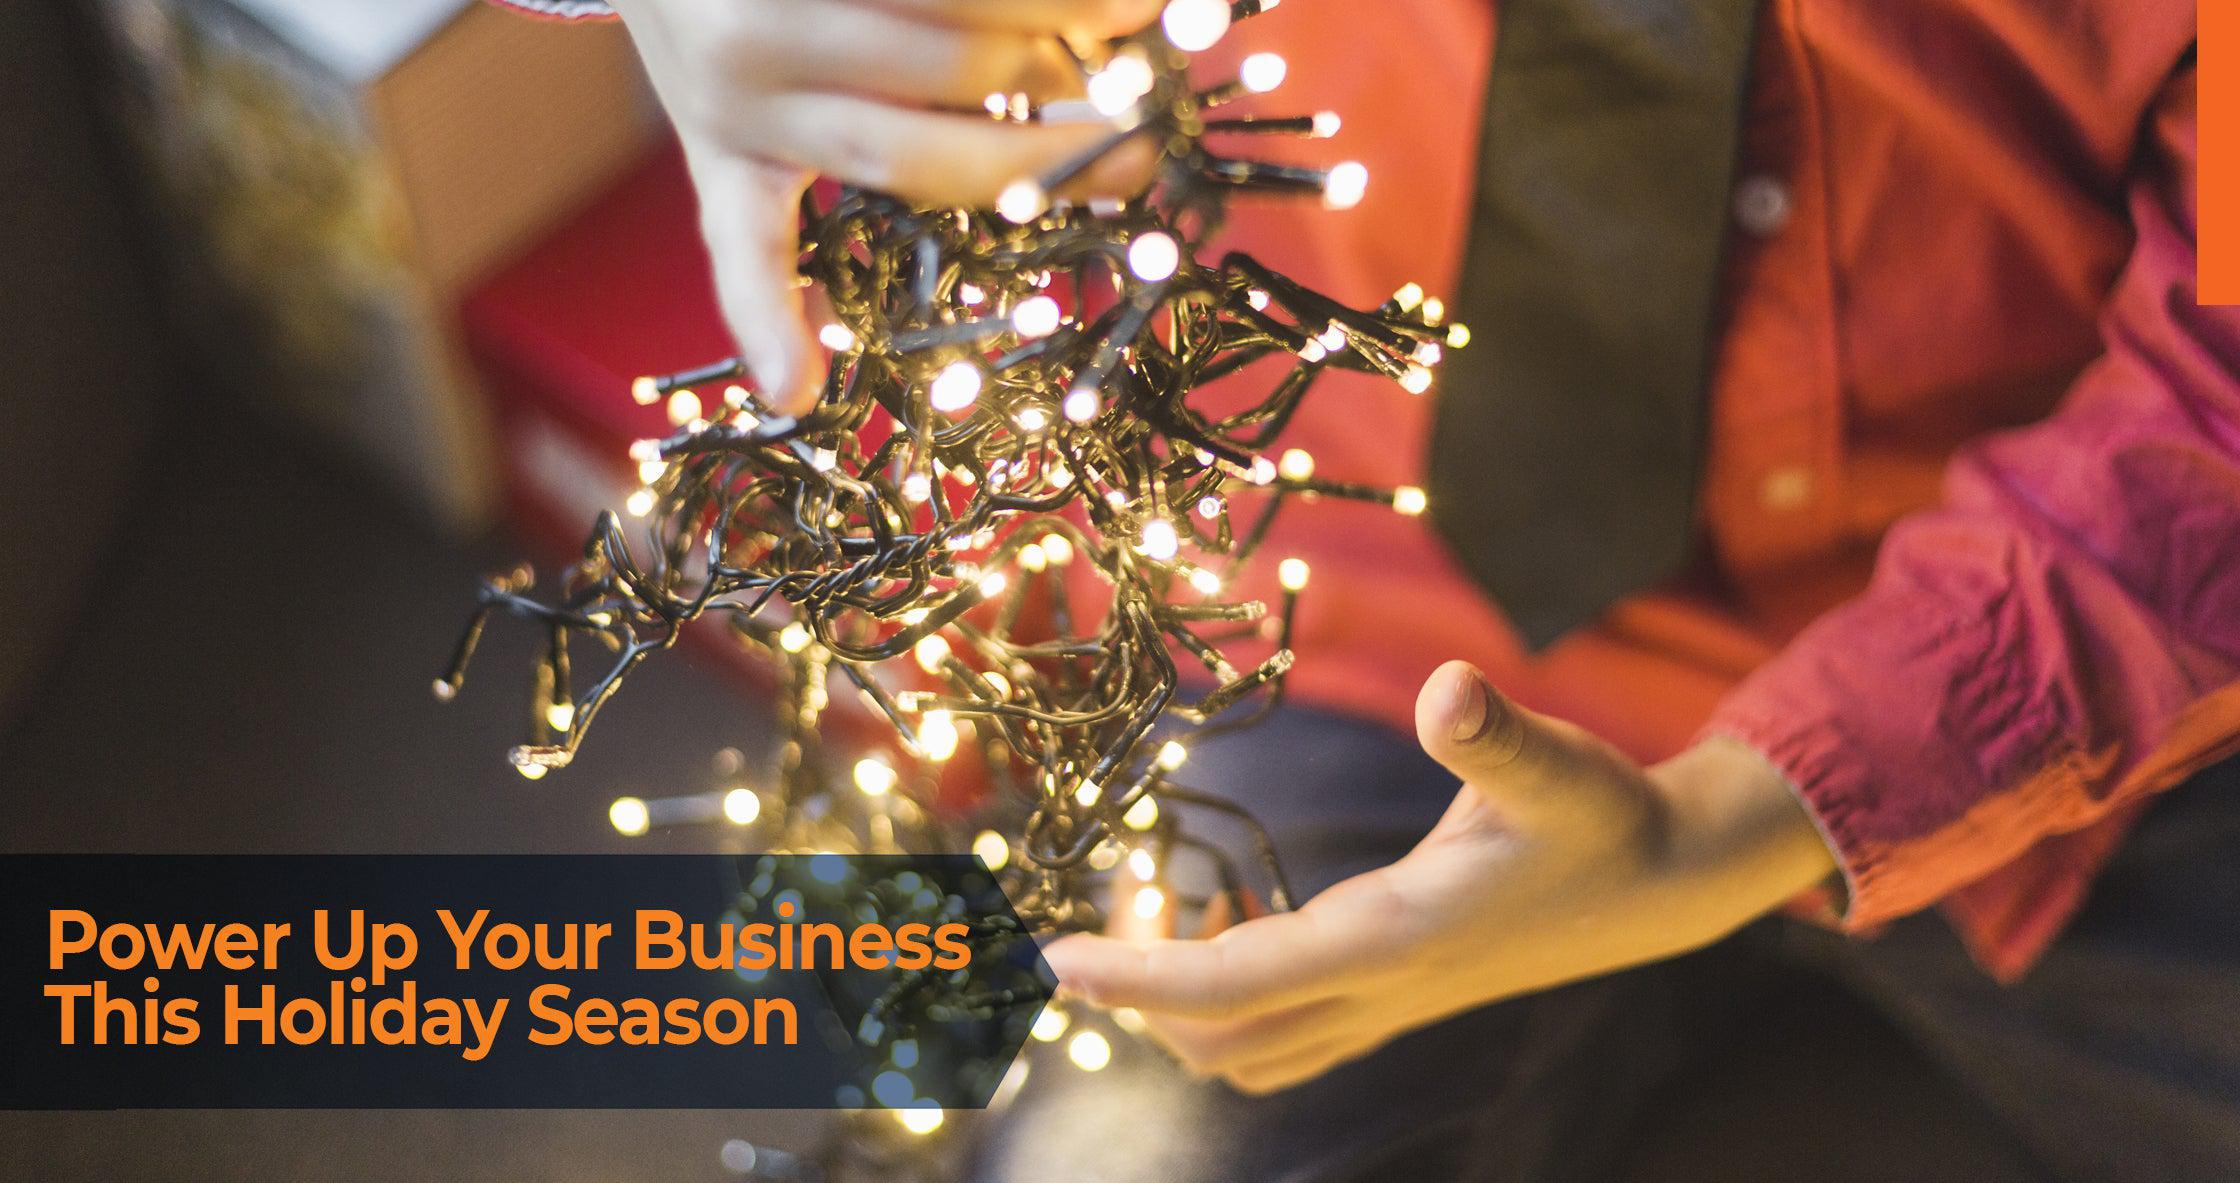 Power Up Your Business This Holiday Season